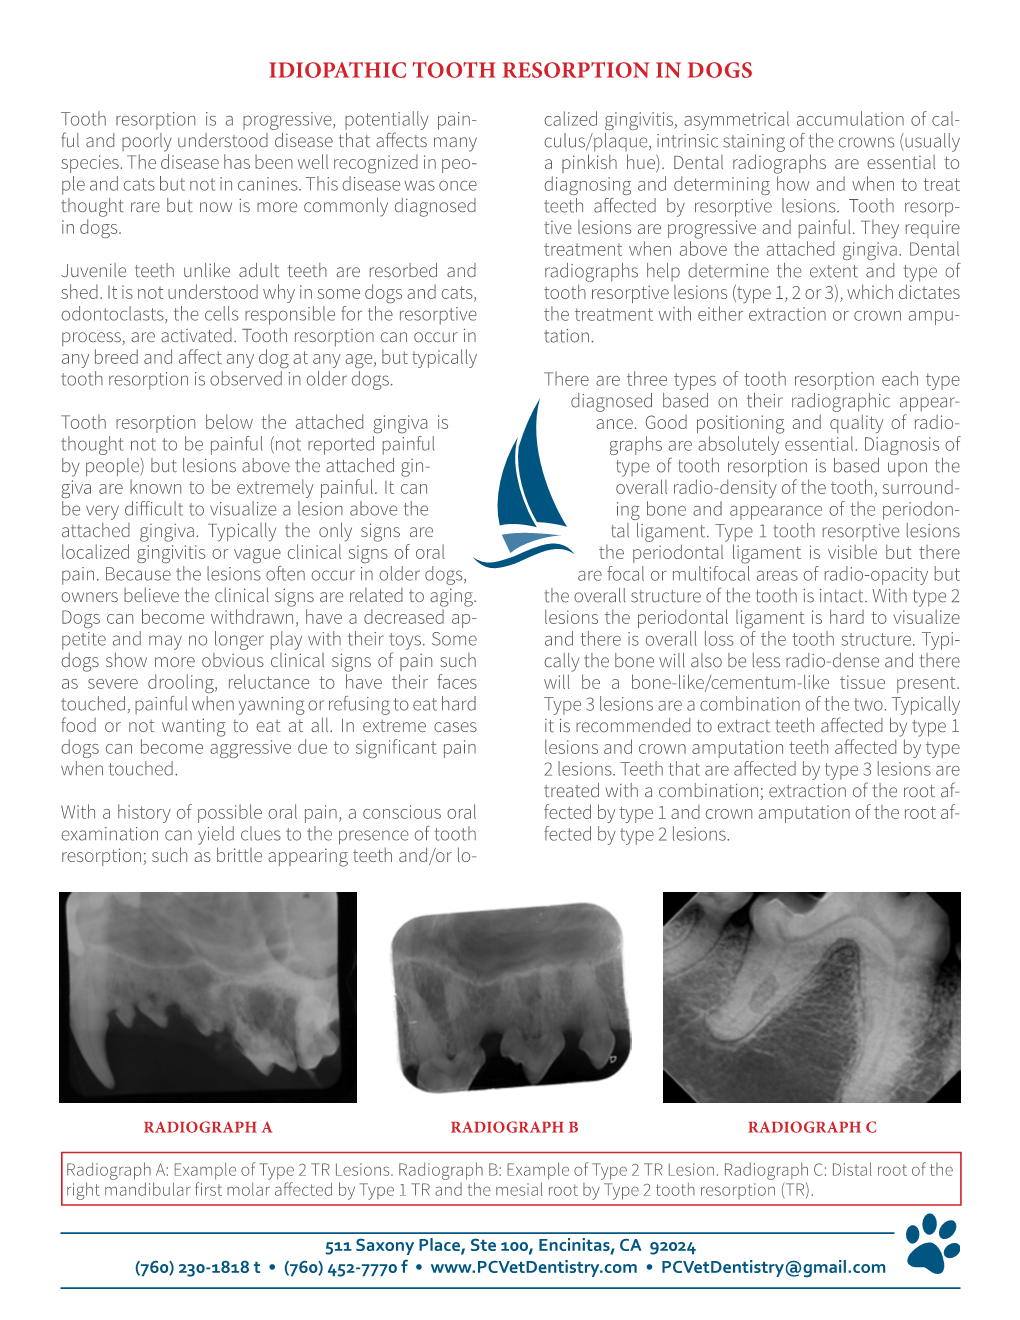 Idiopathic Tooth Resorption in Dogs